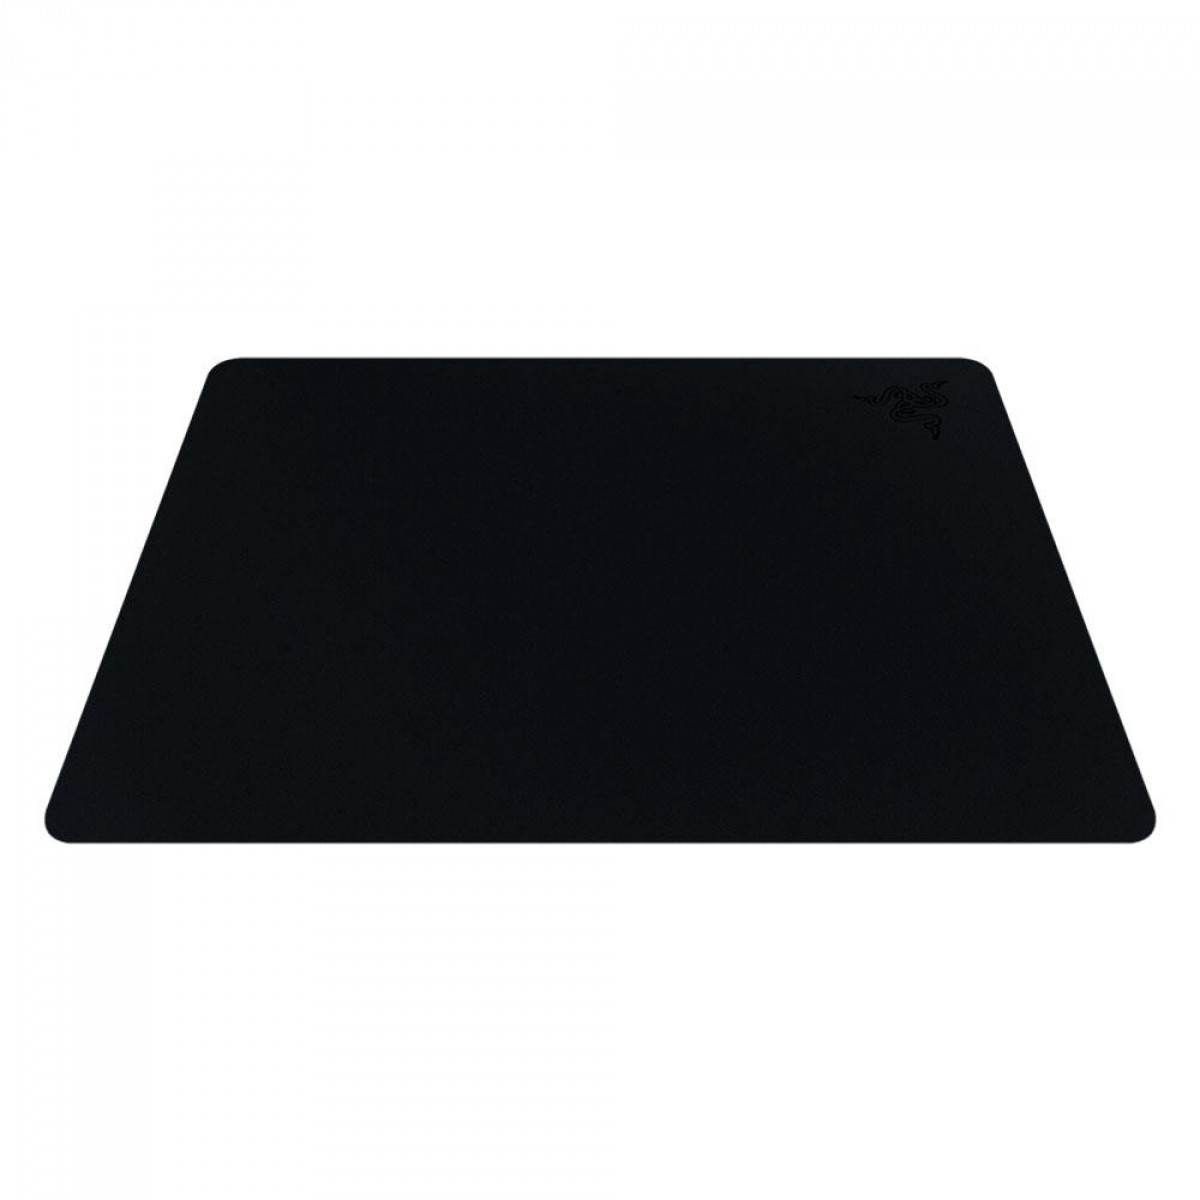 Mouse Pad Gamer Razer Goliathus Mobile Stealth, Control/Speed, Pequeno (270x215mm) - RZ02-01820500-R3U1